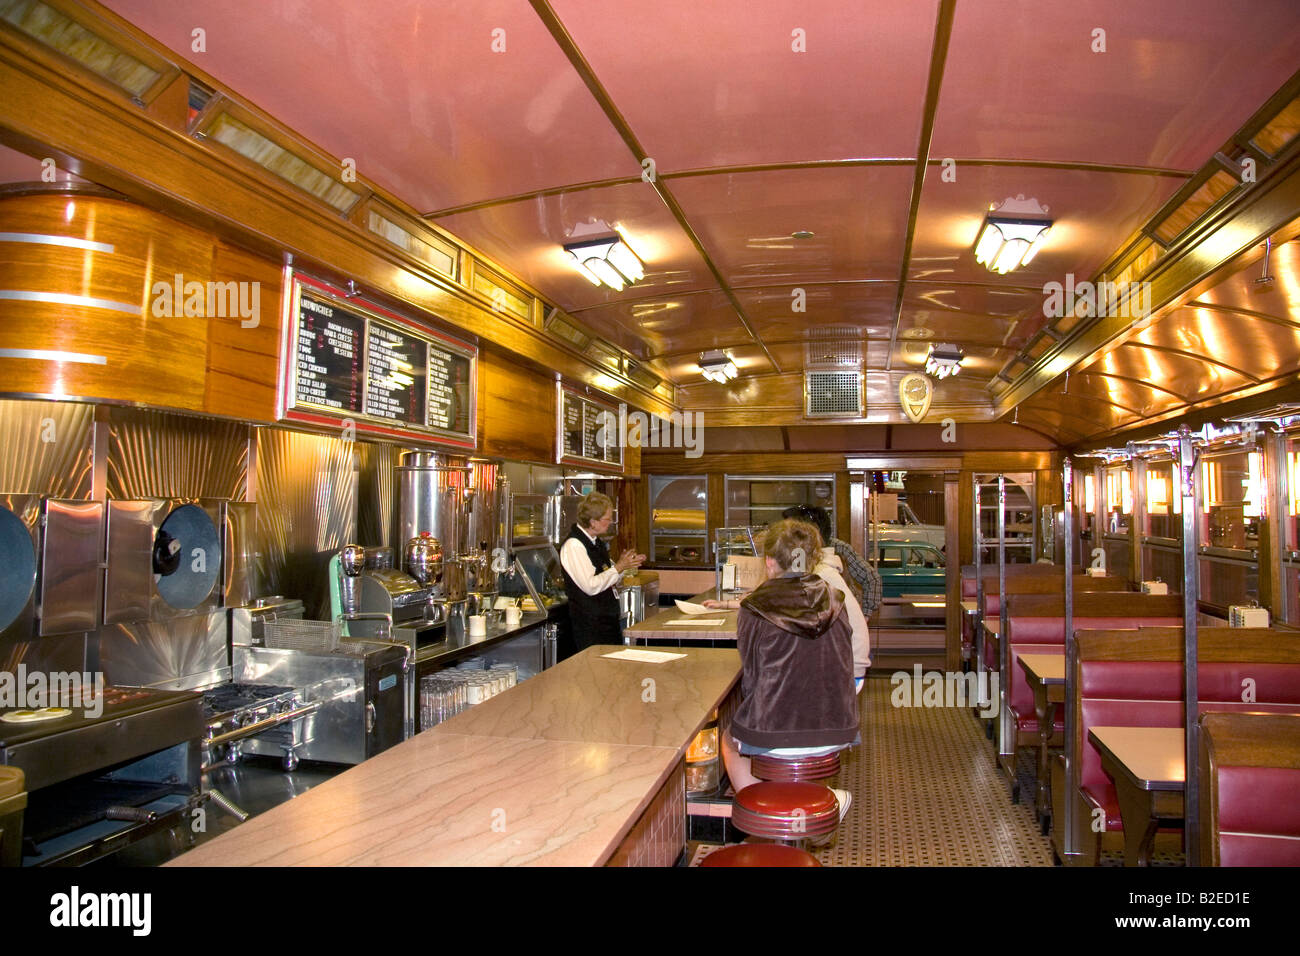 Interior of Lamys Diner at The Henry Ford Museum in Dearborn Michigan Stock Photo